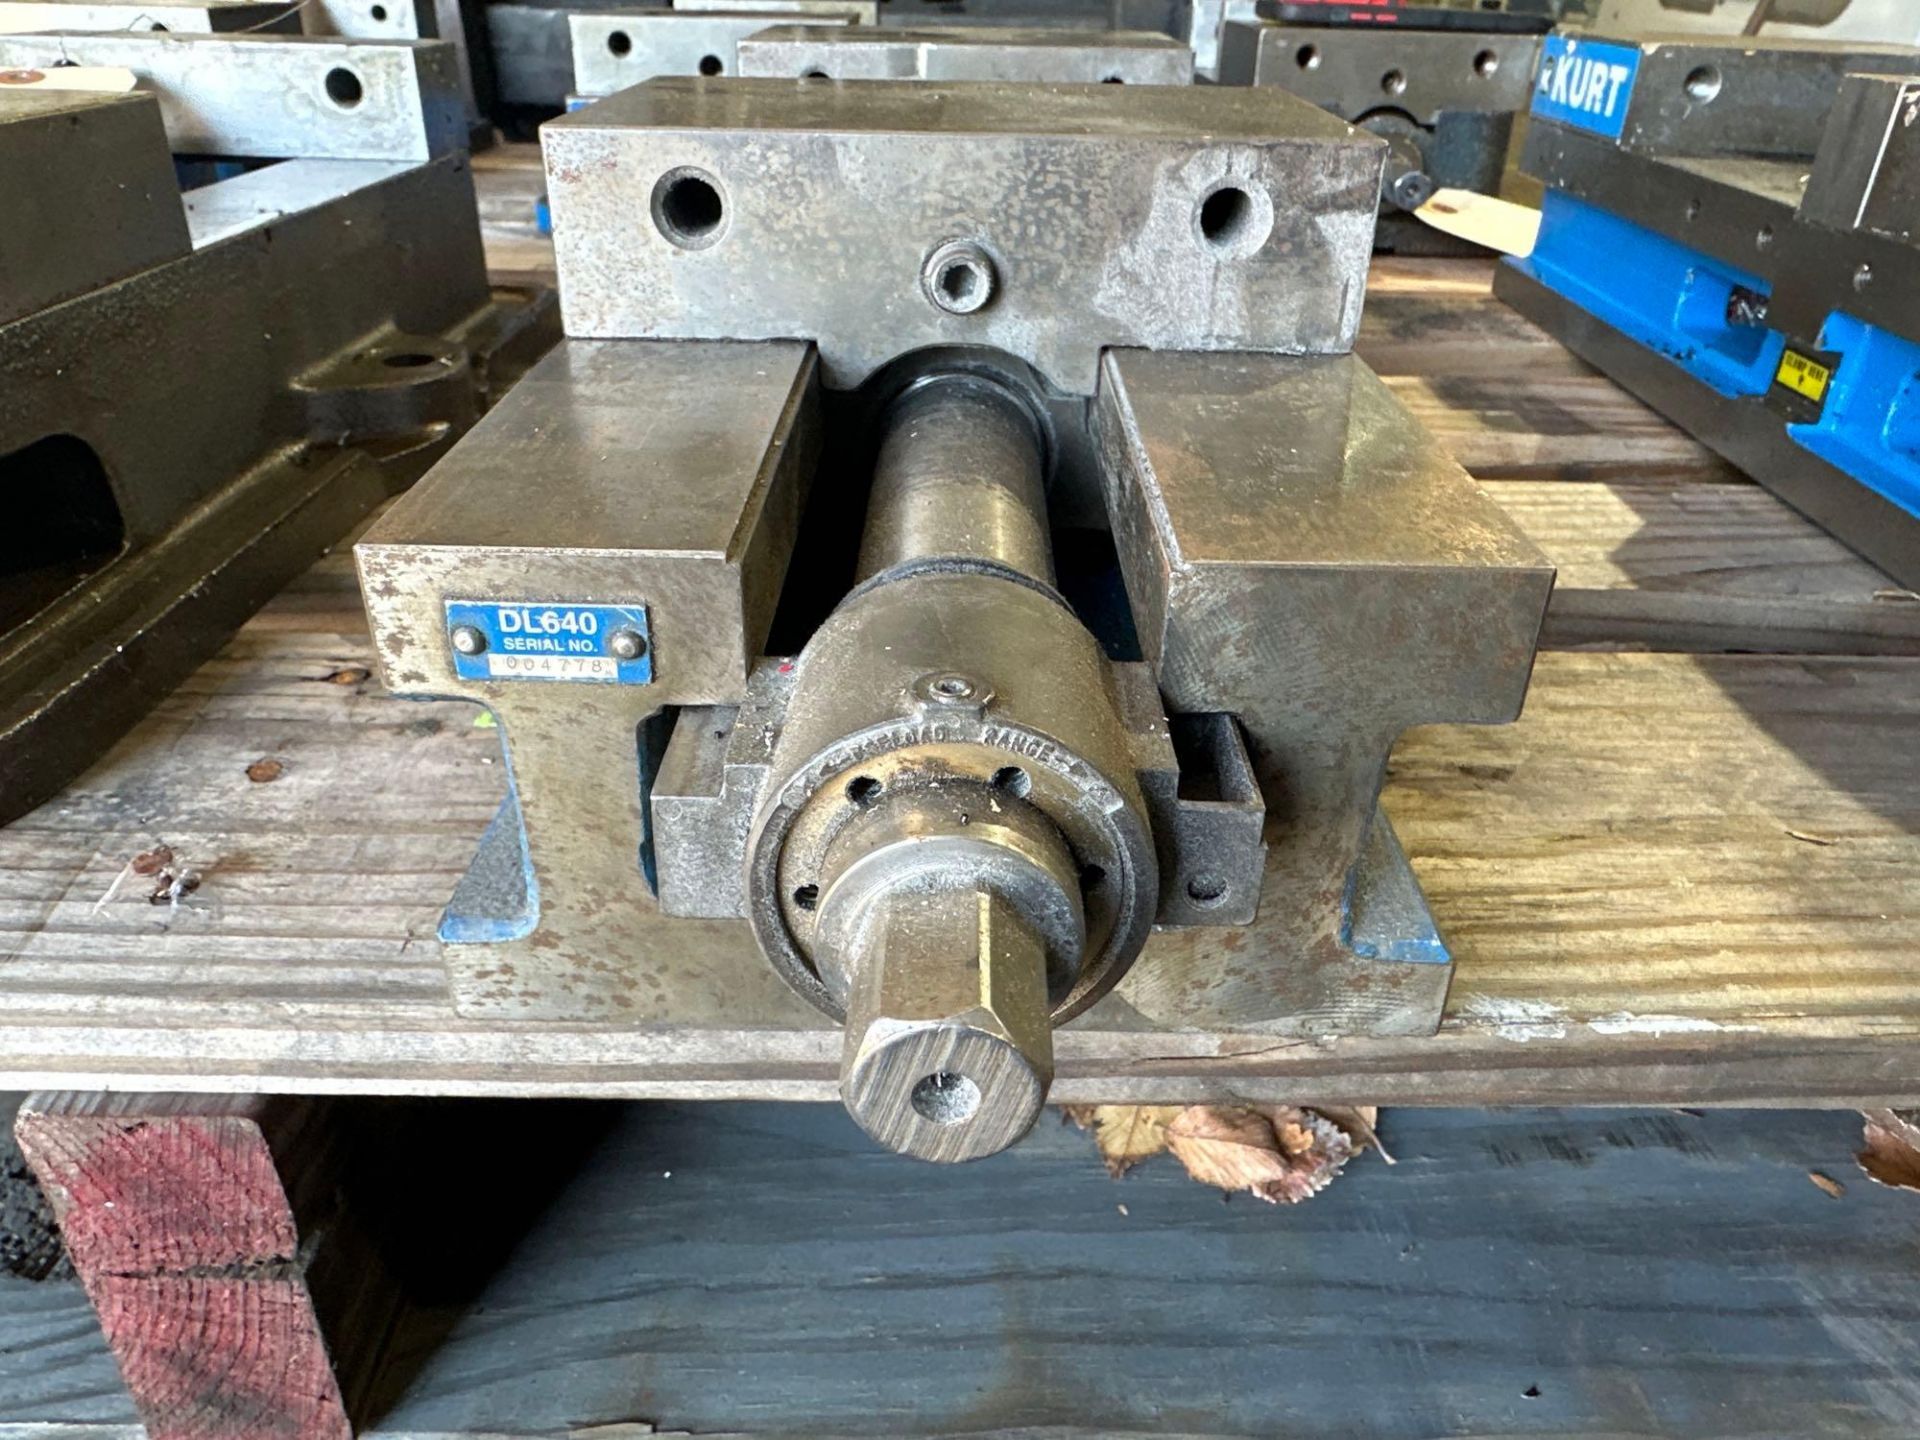 Kurt DL640 AngLock Double Lock Manual 6” Machinist Vise, S/N: 004778. For Part. See photo. - Image 7 of 7